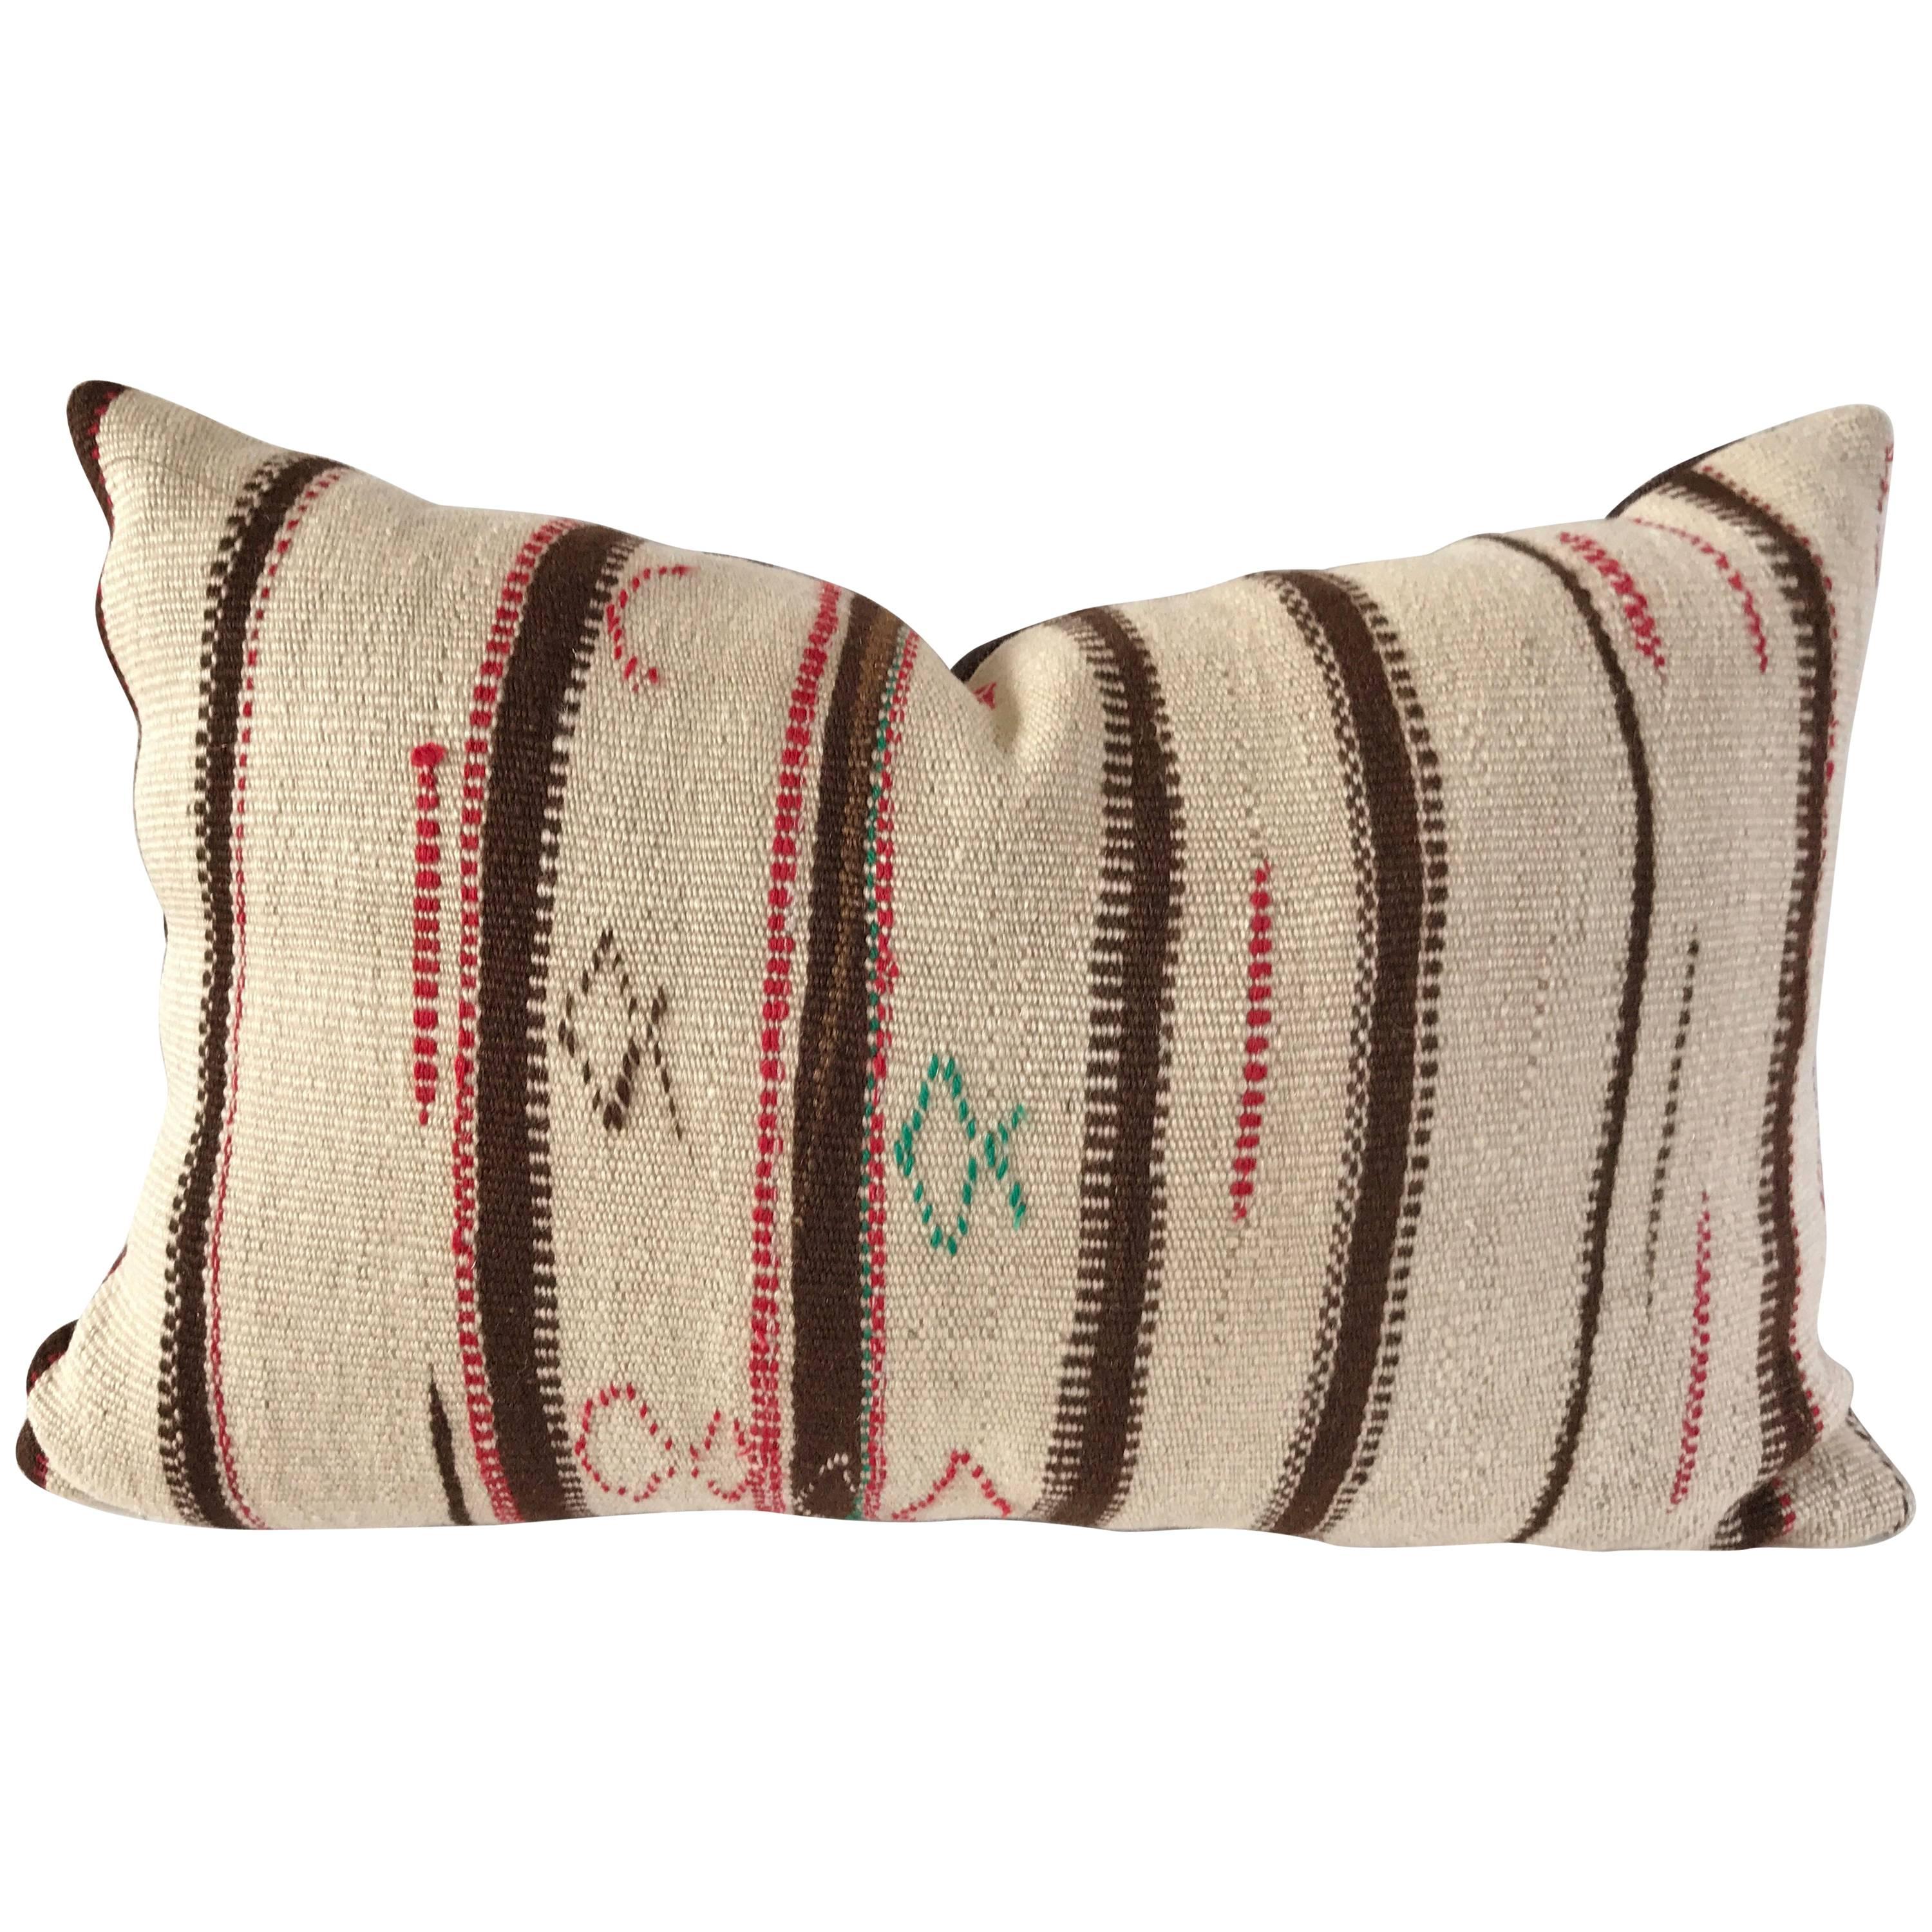 Custom Moroccan Pillow Cut from a Hand-Loomed Wool Vintage Rug